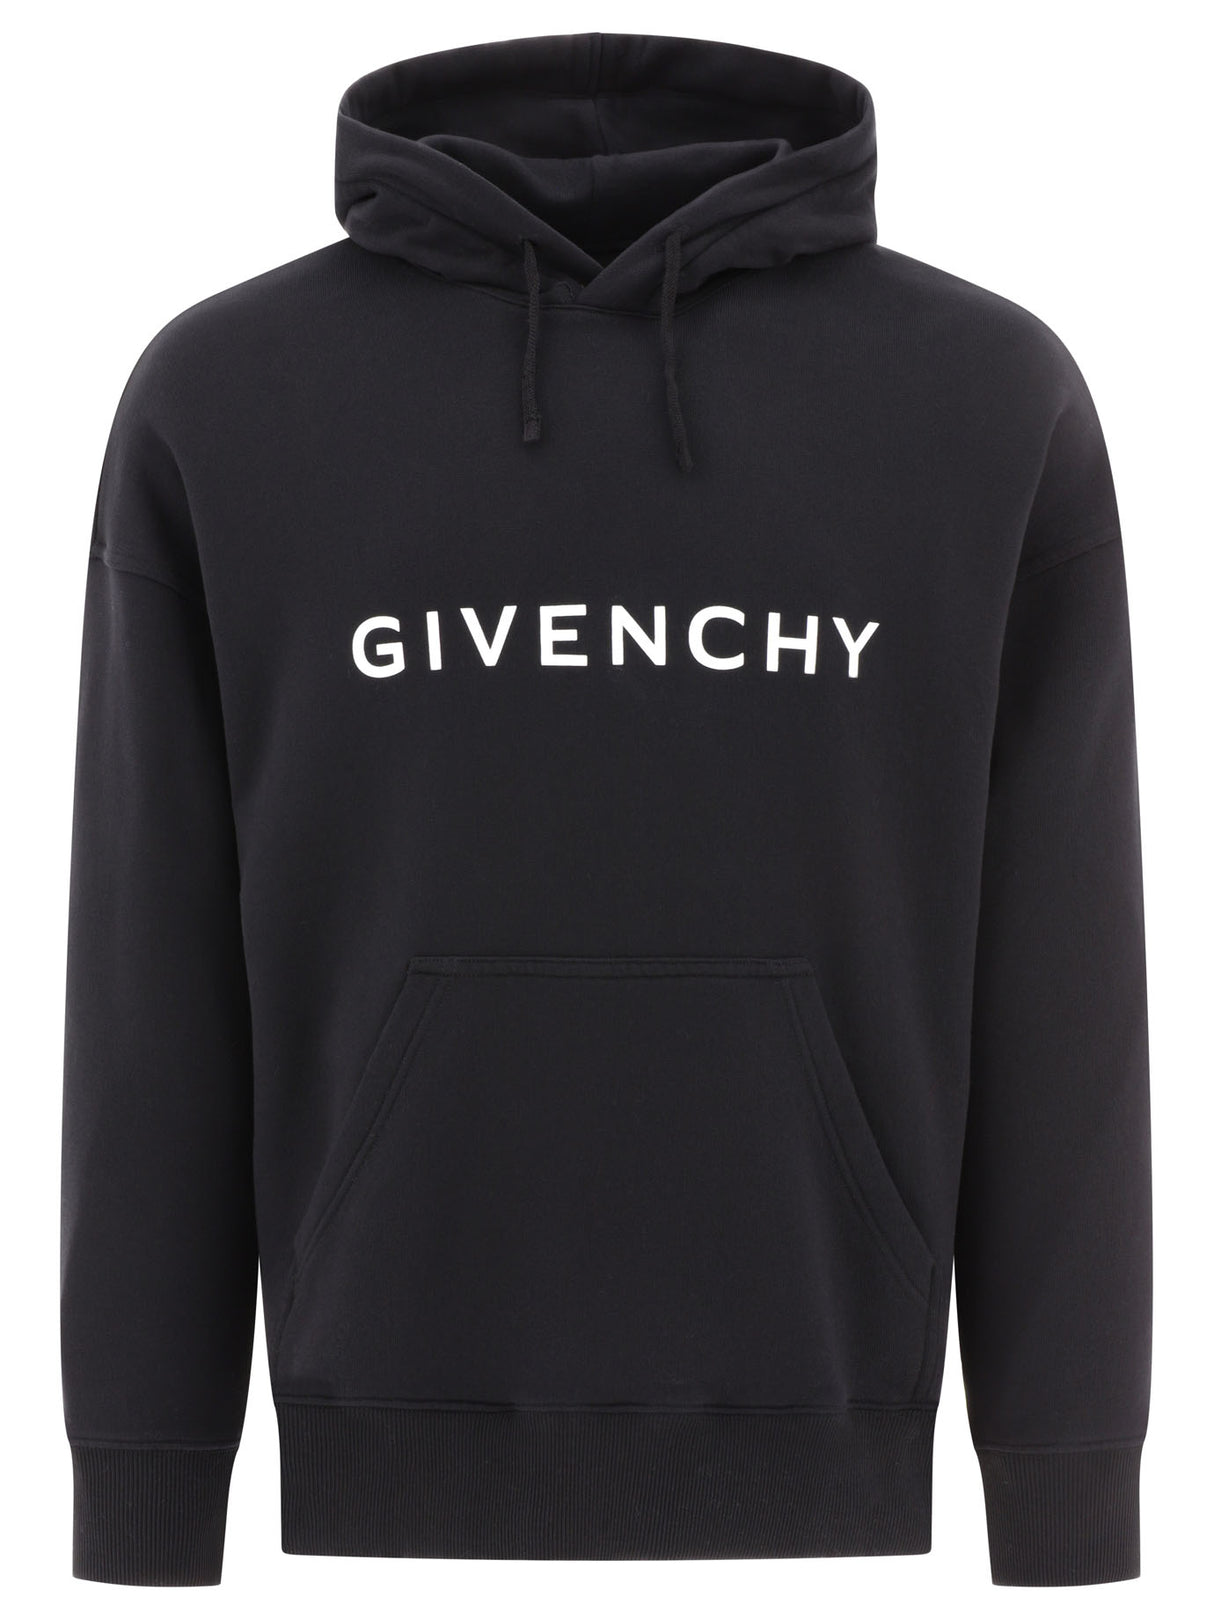 GIVENCHY Modern Black Hoodie for Men